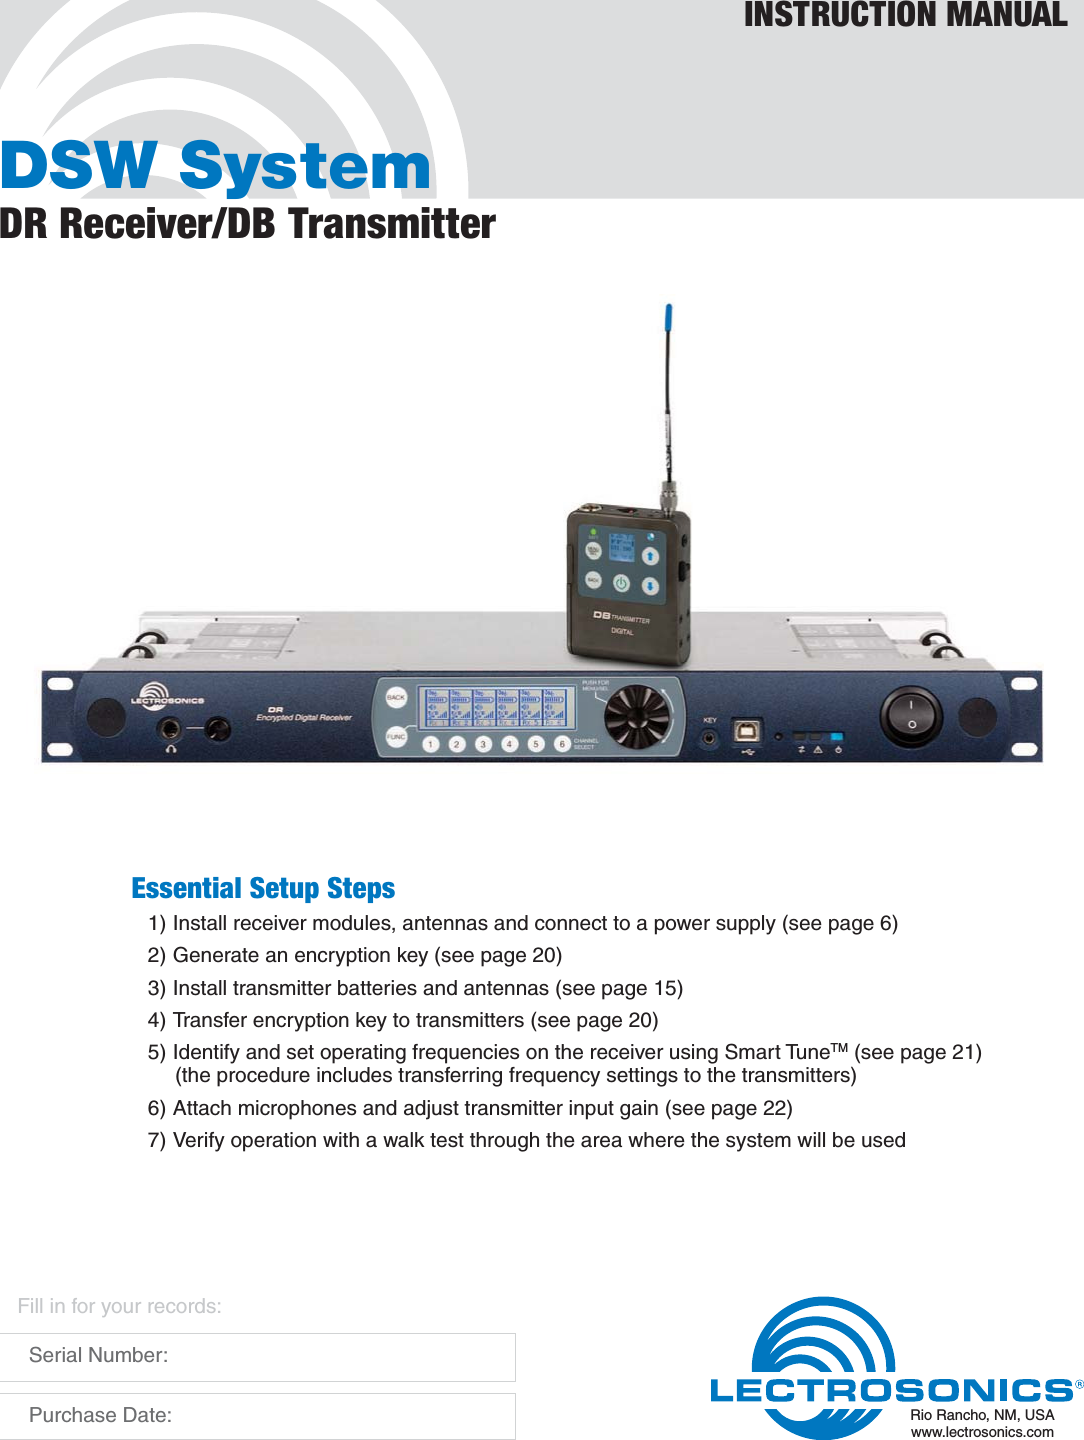 DSW SystemDR Receiver/DB TransmitterINSTRUCTION MANUALRio Rancho, NM, USAwww.lectrosonics.comFill in for your records:  Serial Number:  Purchase Date:Essential Setup Steps1) Install receiver modules, antennas and connect to a power supply (see page 6)2) Generate an encryption key (see page 20)3) Install transmitter batteries and antennas (see page 15)4) Transfer encryption key to transmitters (see page 20)5) Identify and set operating frequencies on the receiver using Smart TuneTM (see page 21)  (the procedure includes transferring frequency settings to the transmitters)6) Attach microphones and adjust transmitter input gain (see page 22)7) Verify operation with a walk test through the area where the system will be used